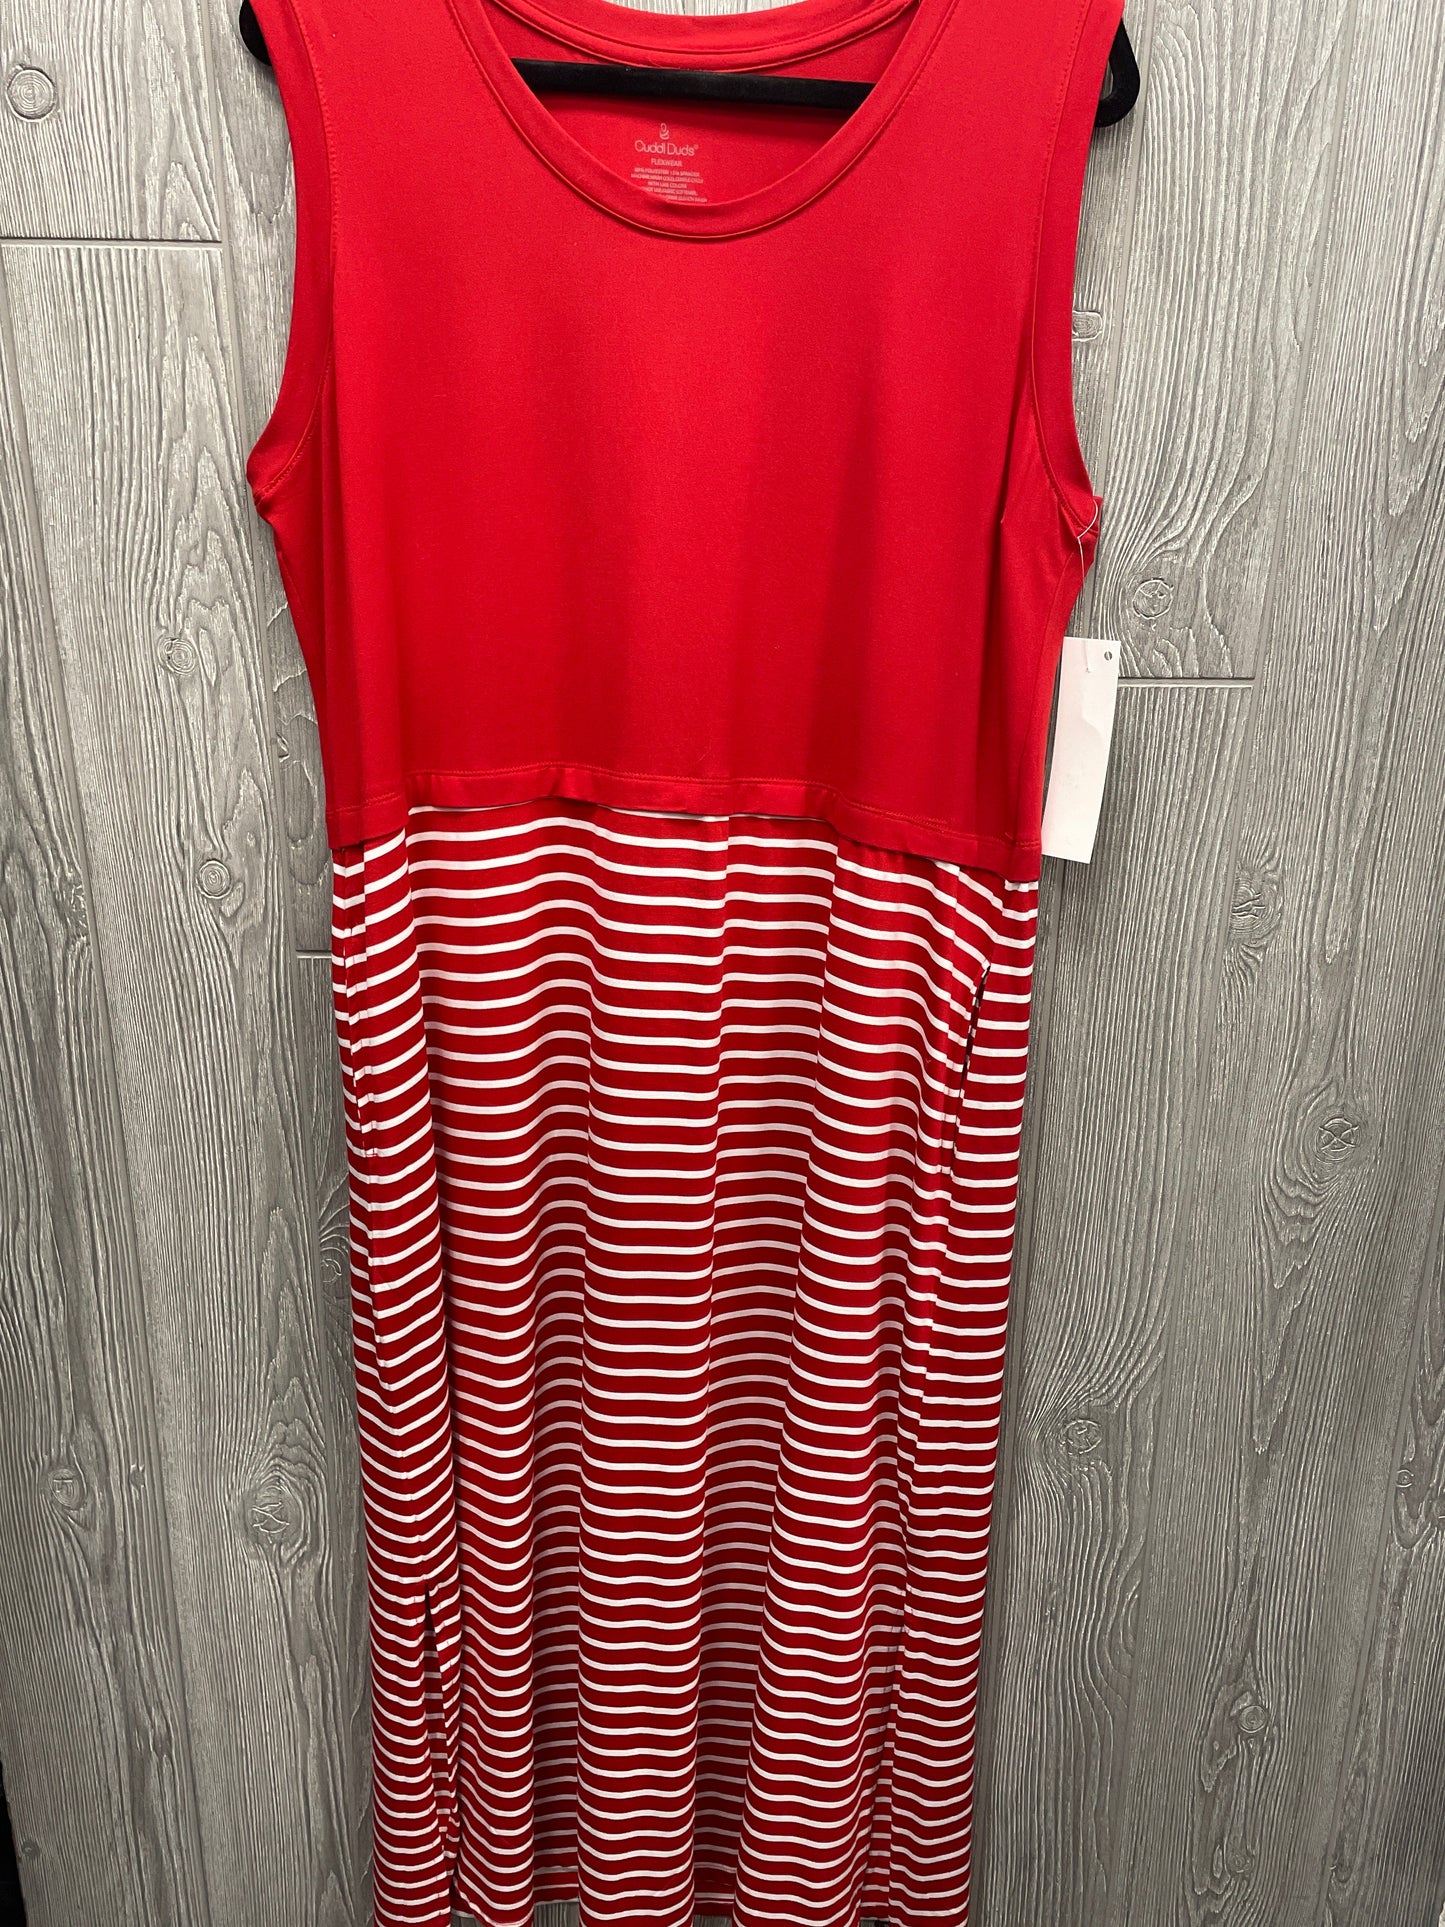 Dress Casual Maxi By Cuddl Duds  Size: Petite   Xl